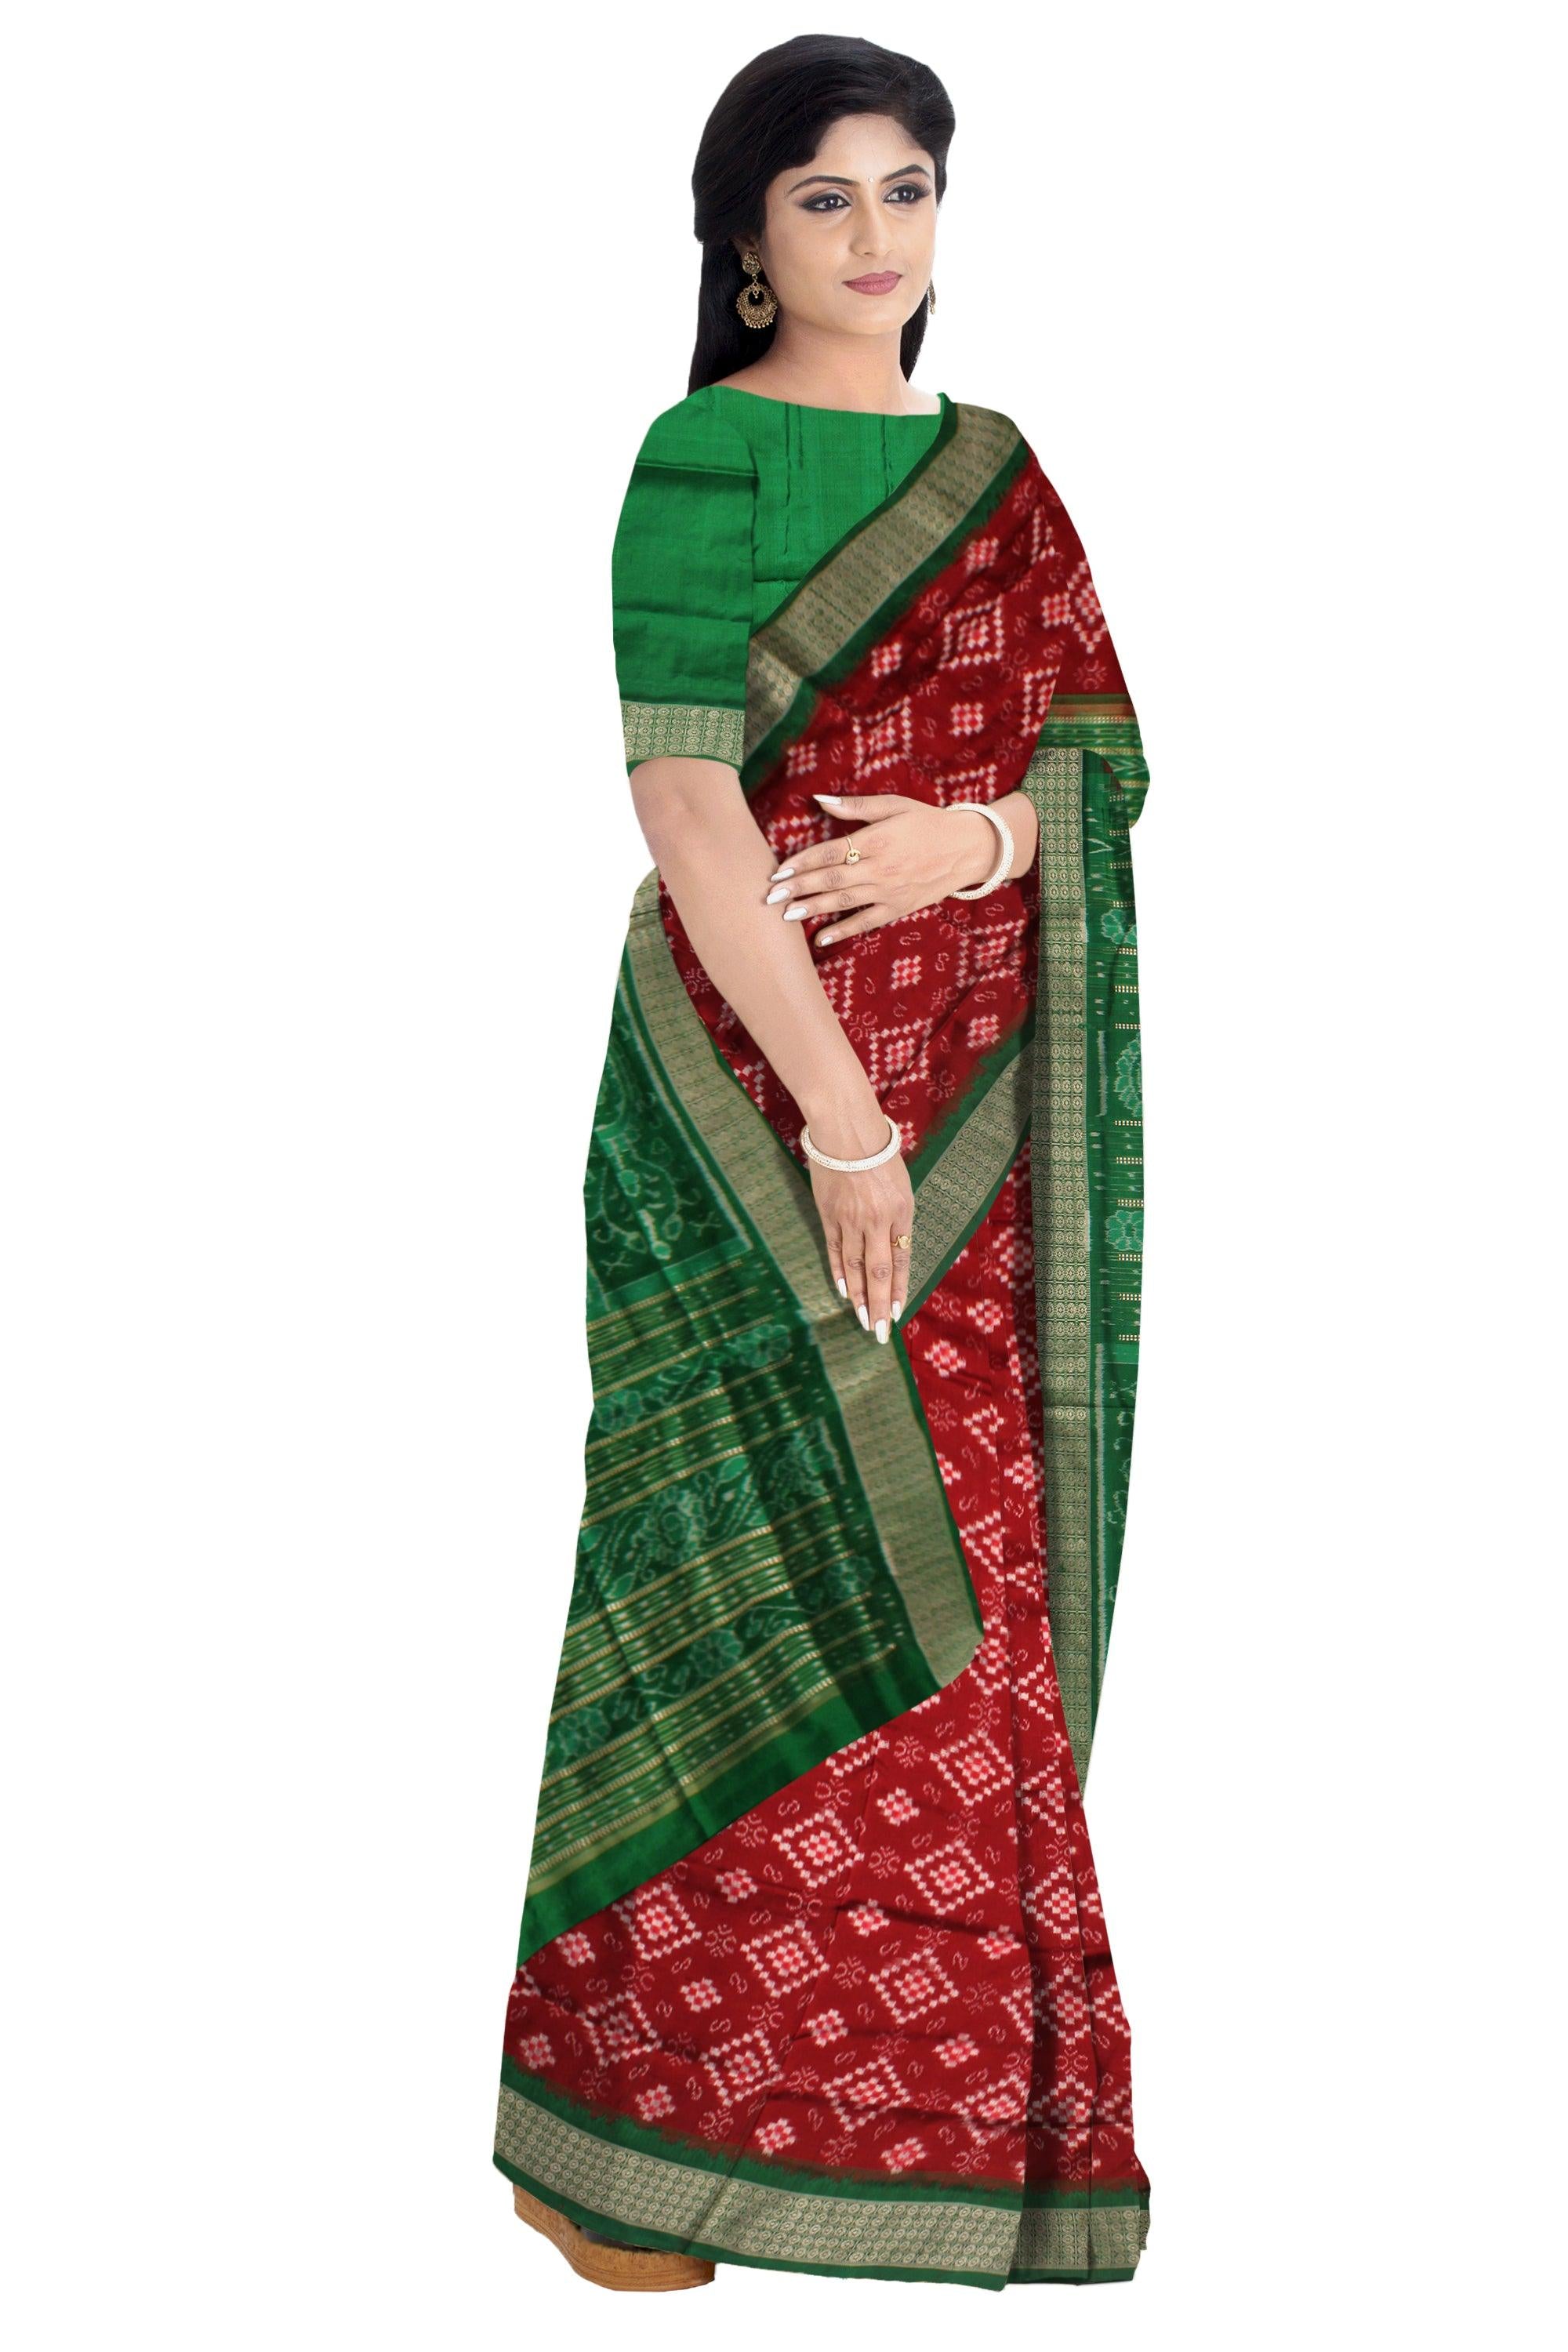 NEW COLLECTION PASAPALI PURE PATA SAREE IN MAROON AND GREEN COLOR BASE, WITH BLOUSE PIECE. - Koshali Arts & Crafts Enterprise